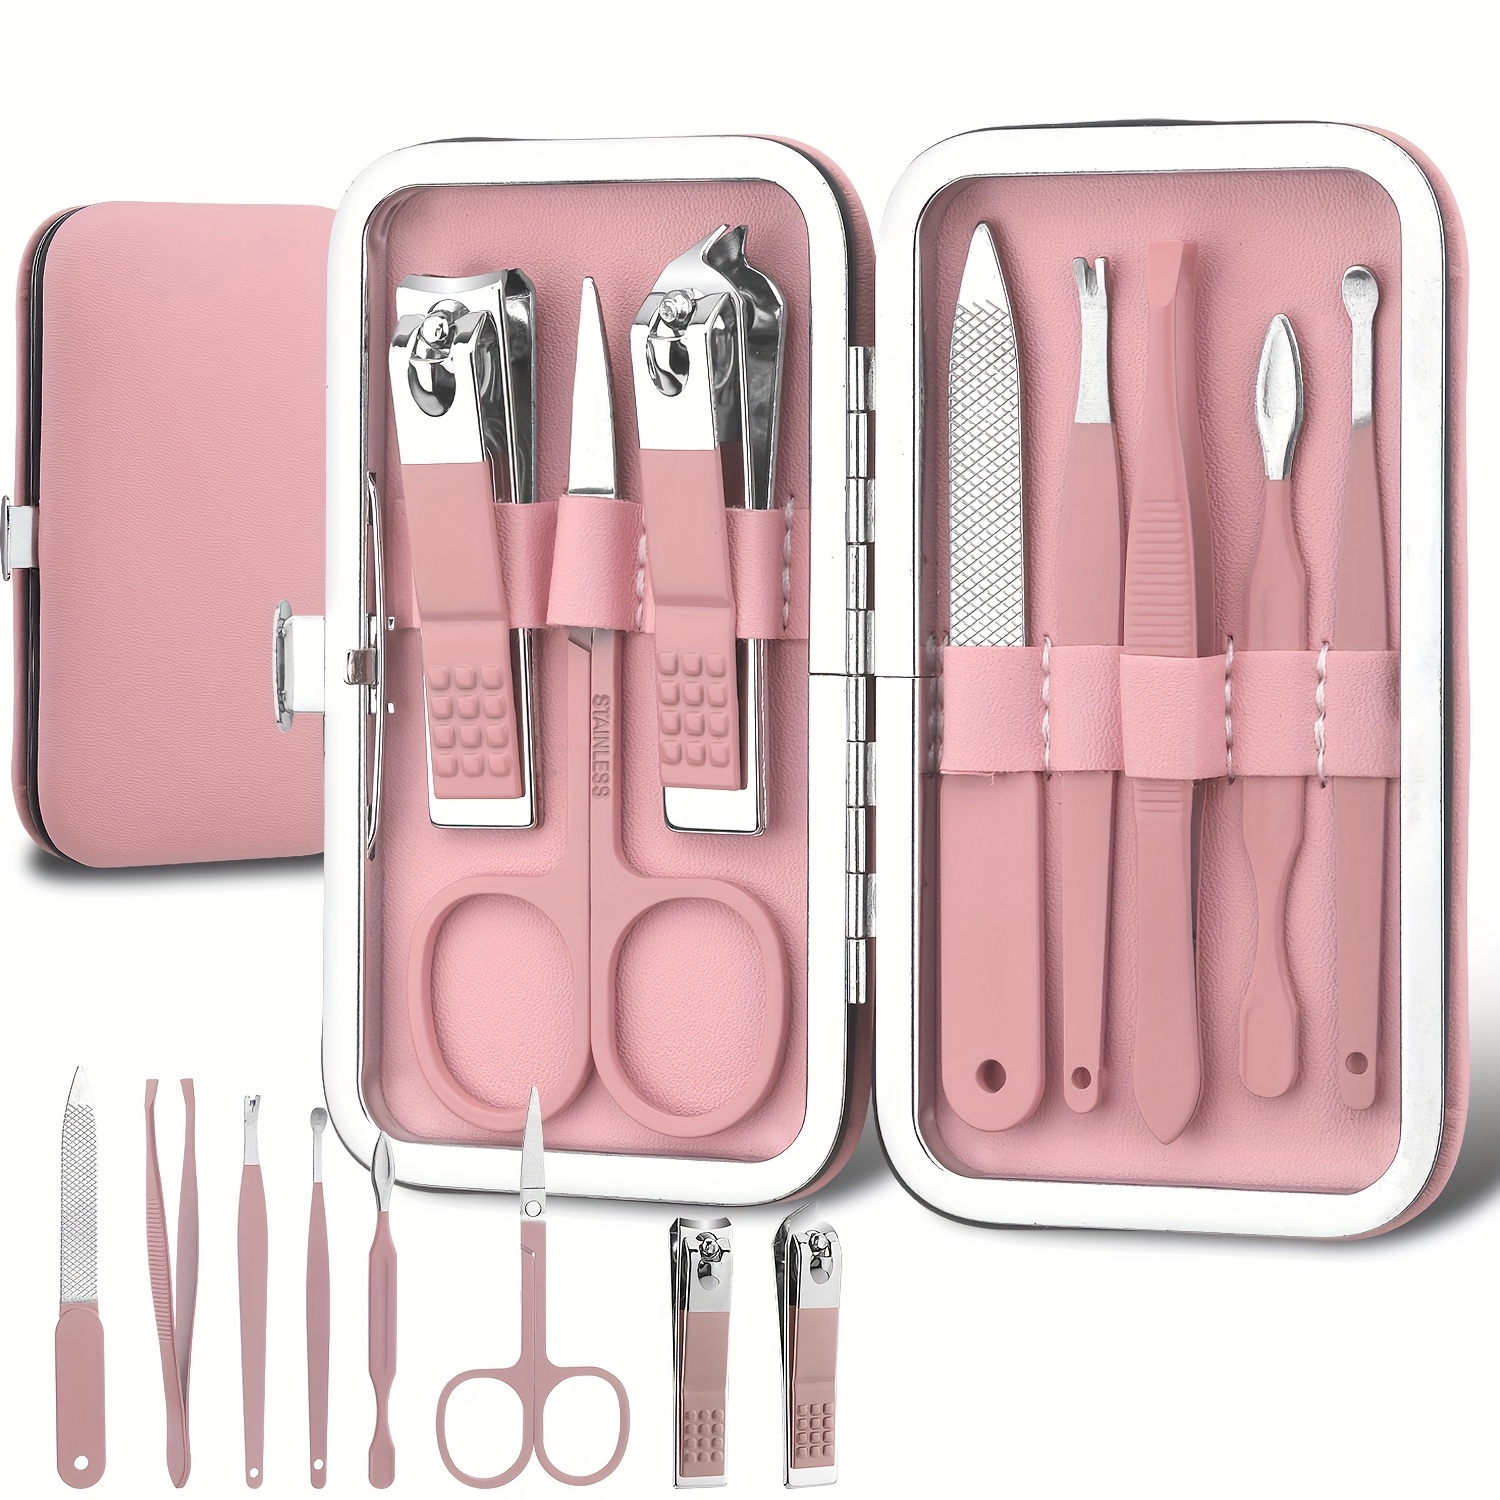 

Nail Clippers And Beauty Tool Portable Set, Rose Golden Martensitic Stainless Steel Manicure Set 8 In 1, With Pink Leather Bag, Suitable For Home, Workplace, Outdoor Travel, Gift Giving, Salon